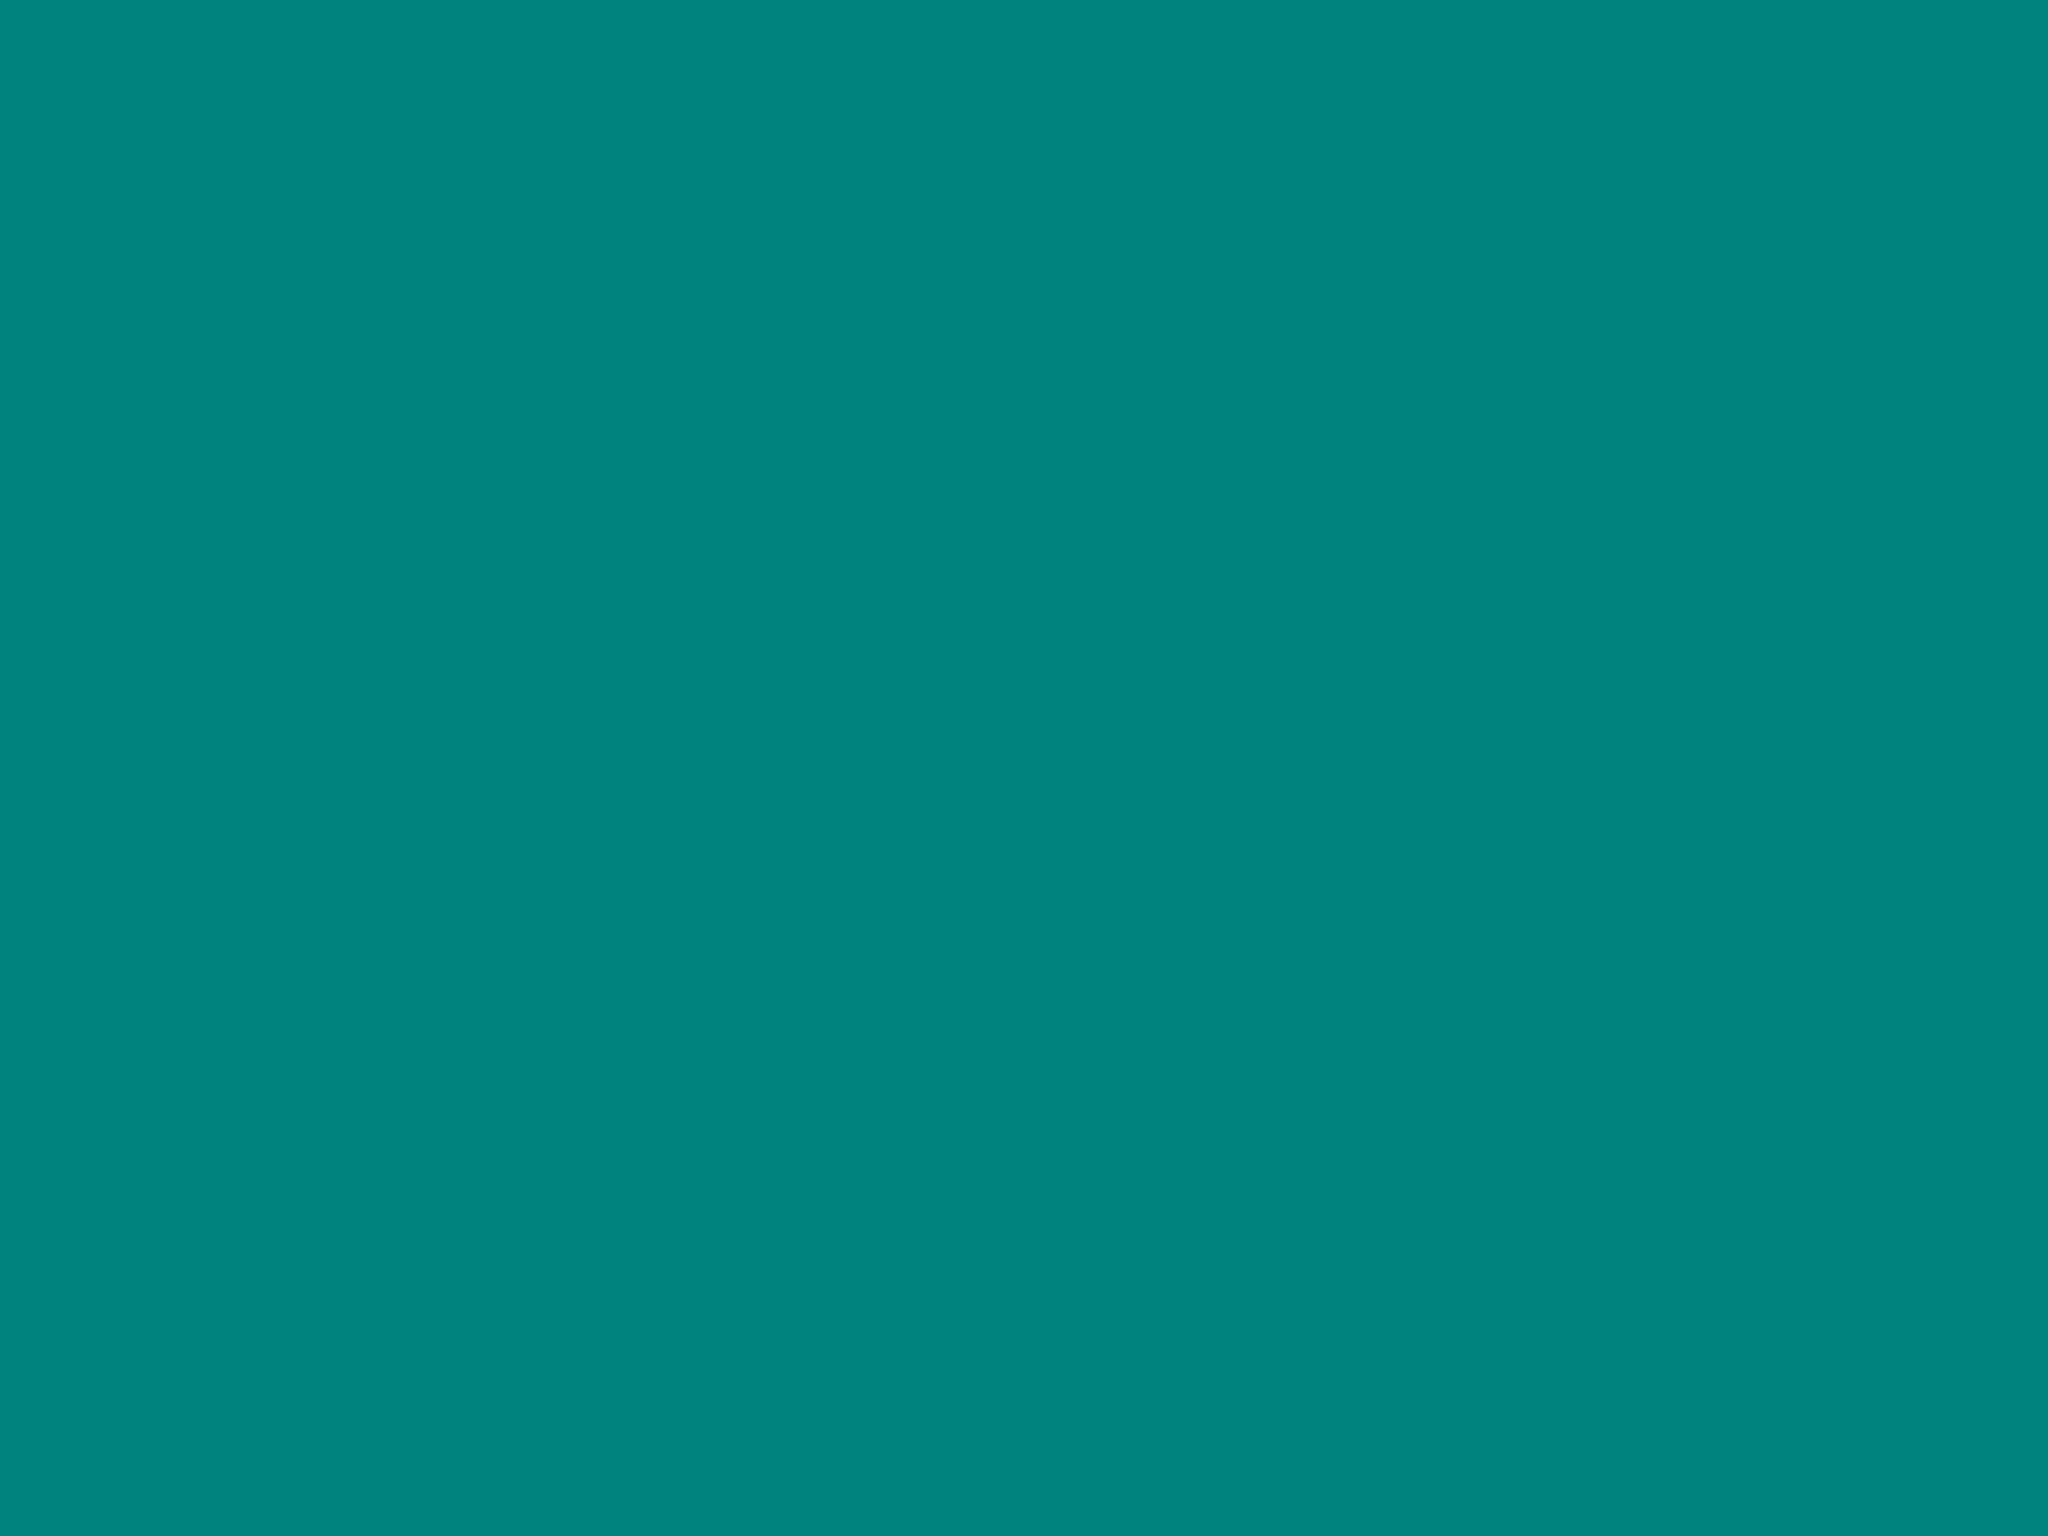 2048x1536 Teal Green Solid Color Background